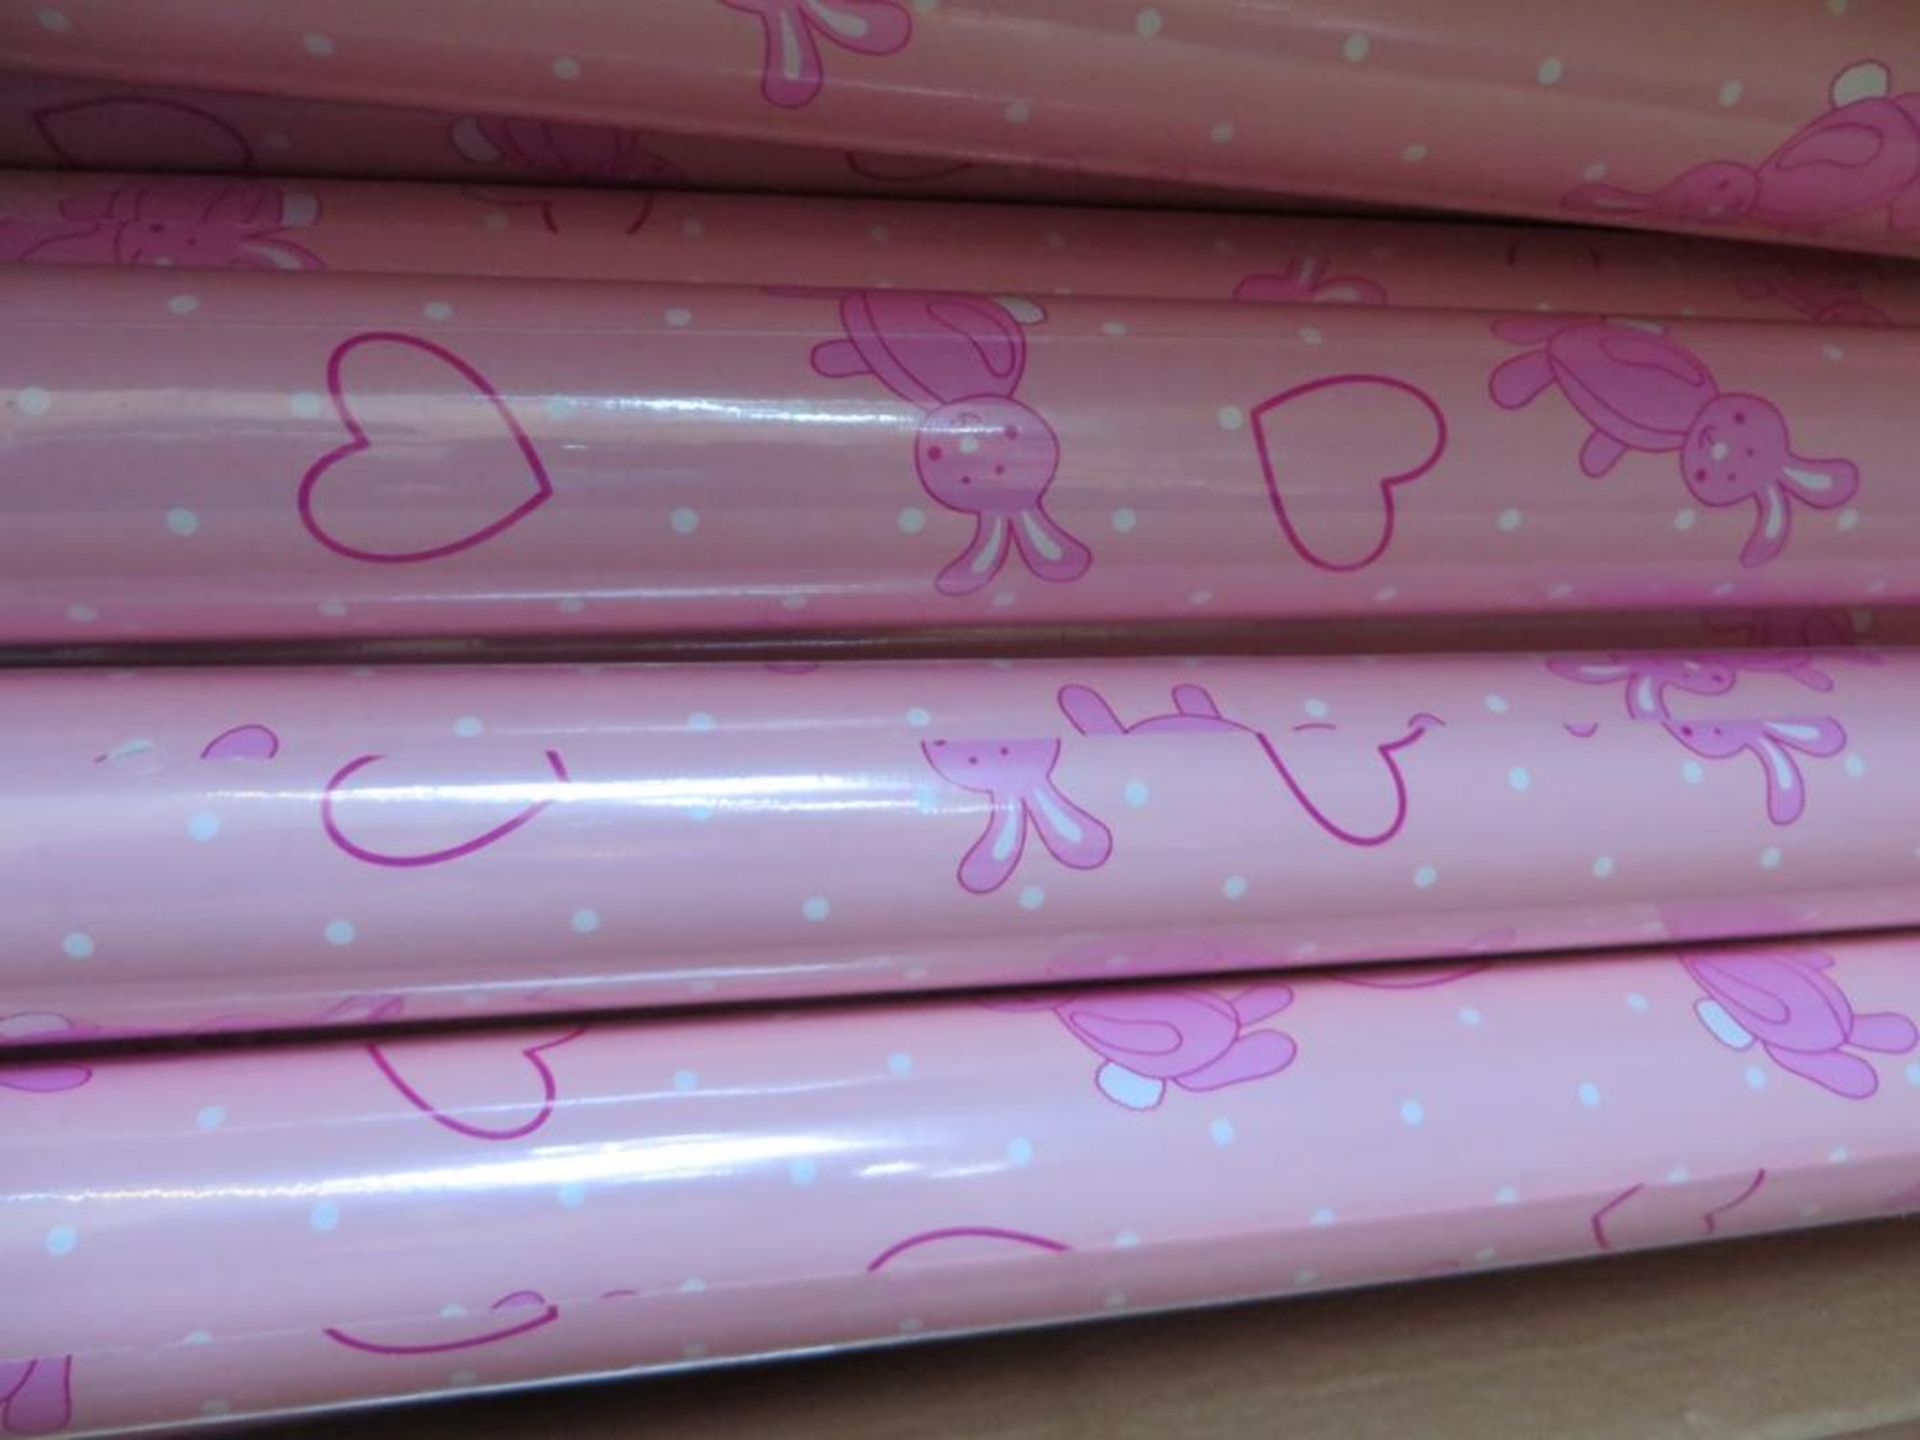 9 x Rolls of Bunny Wrap Wrapping Paper - CL185 - Ref: DRT0685 - Location: Stoke ST3 Items located in - Image 2 of 5